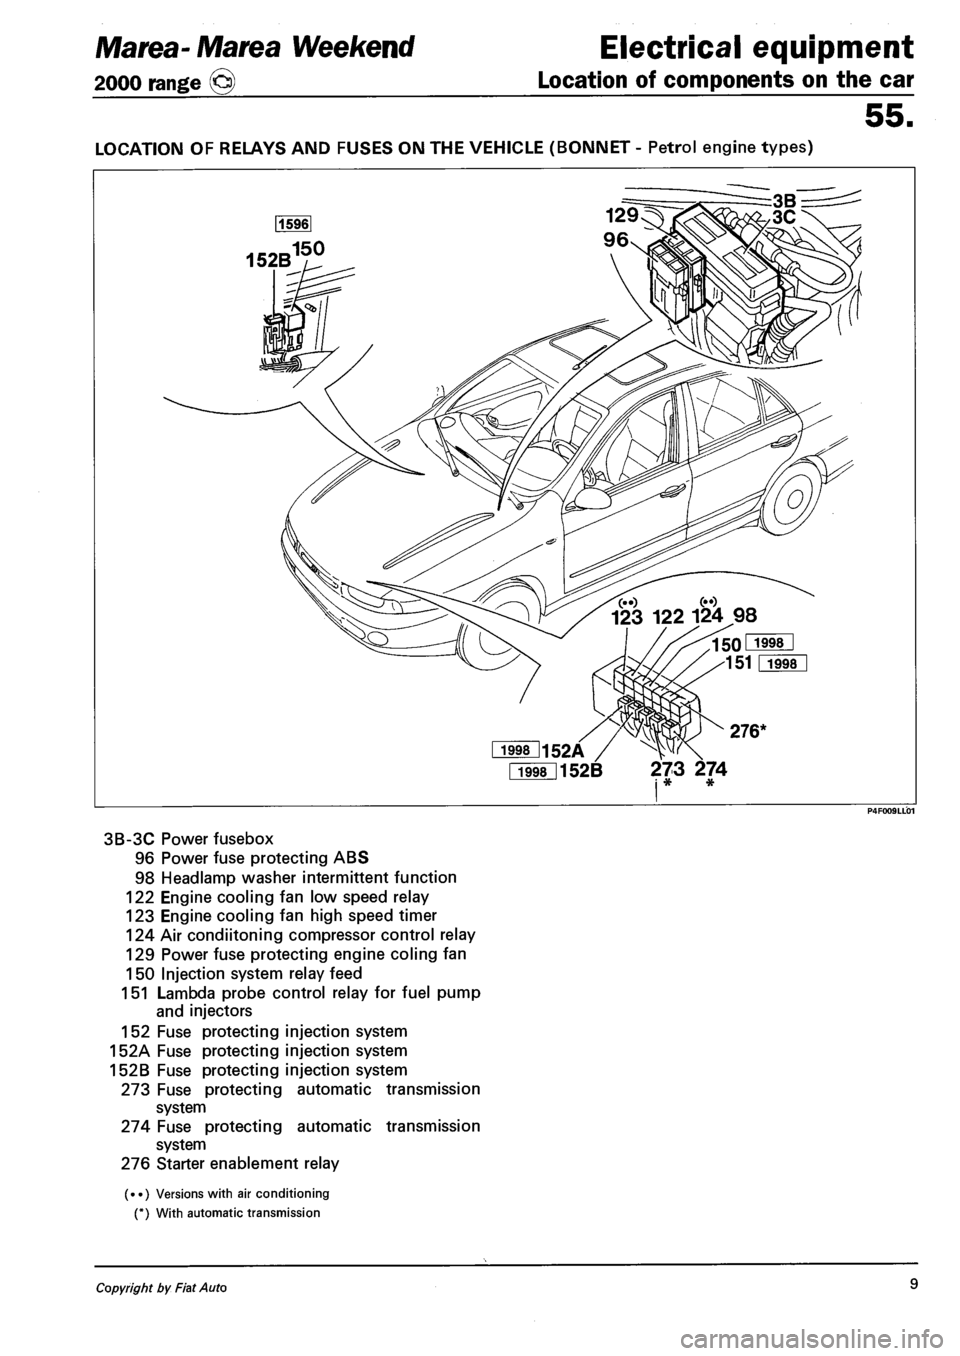 FIAT MAREA 2001 1.G Workshop Manual Marea-Marea Weekend Electrical equipment 
2000 range (§) Location of components on the car 
55. 
LOCATION OF RELAYS AND FUSES ON THE VEHICLE (BONNET - Petrol engine types) 
Fi998l152B 273 274 i * * 
